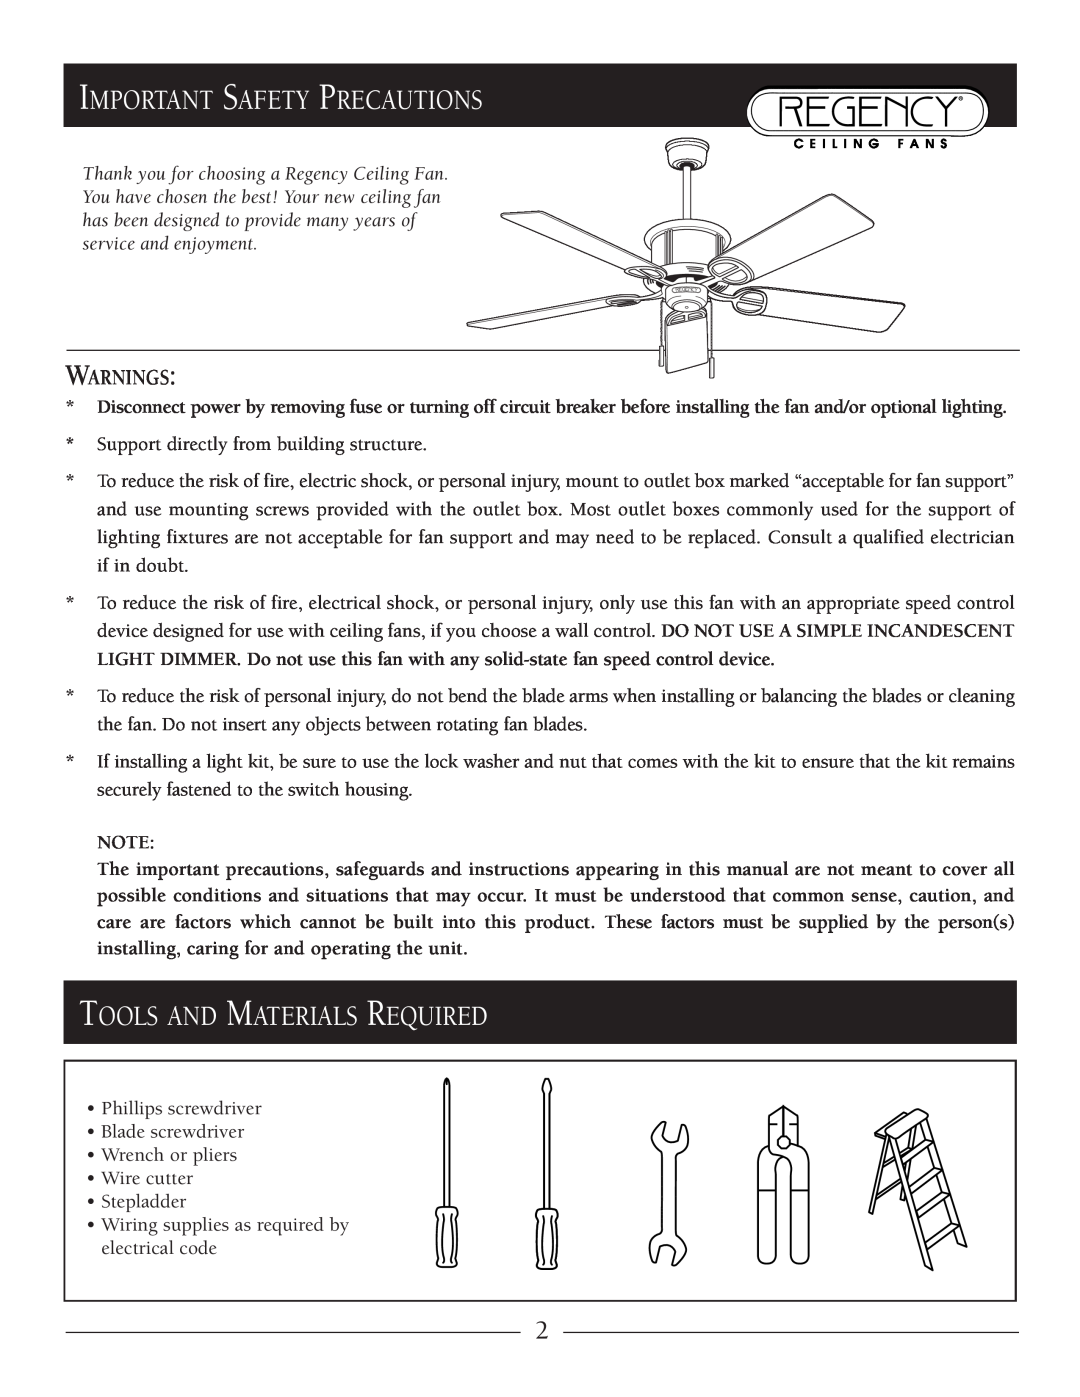 Regency Regatta owner manual Important Safety Precautions, Tools And Materials Required, Warnings 